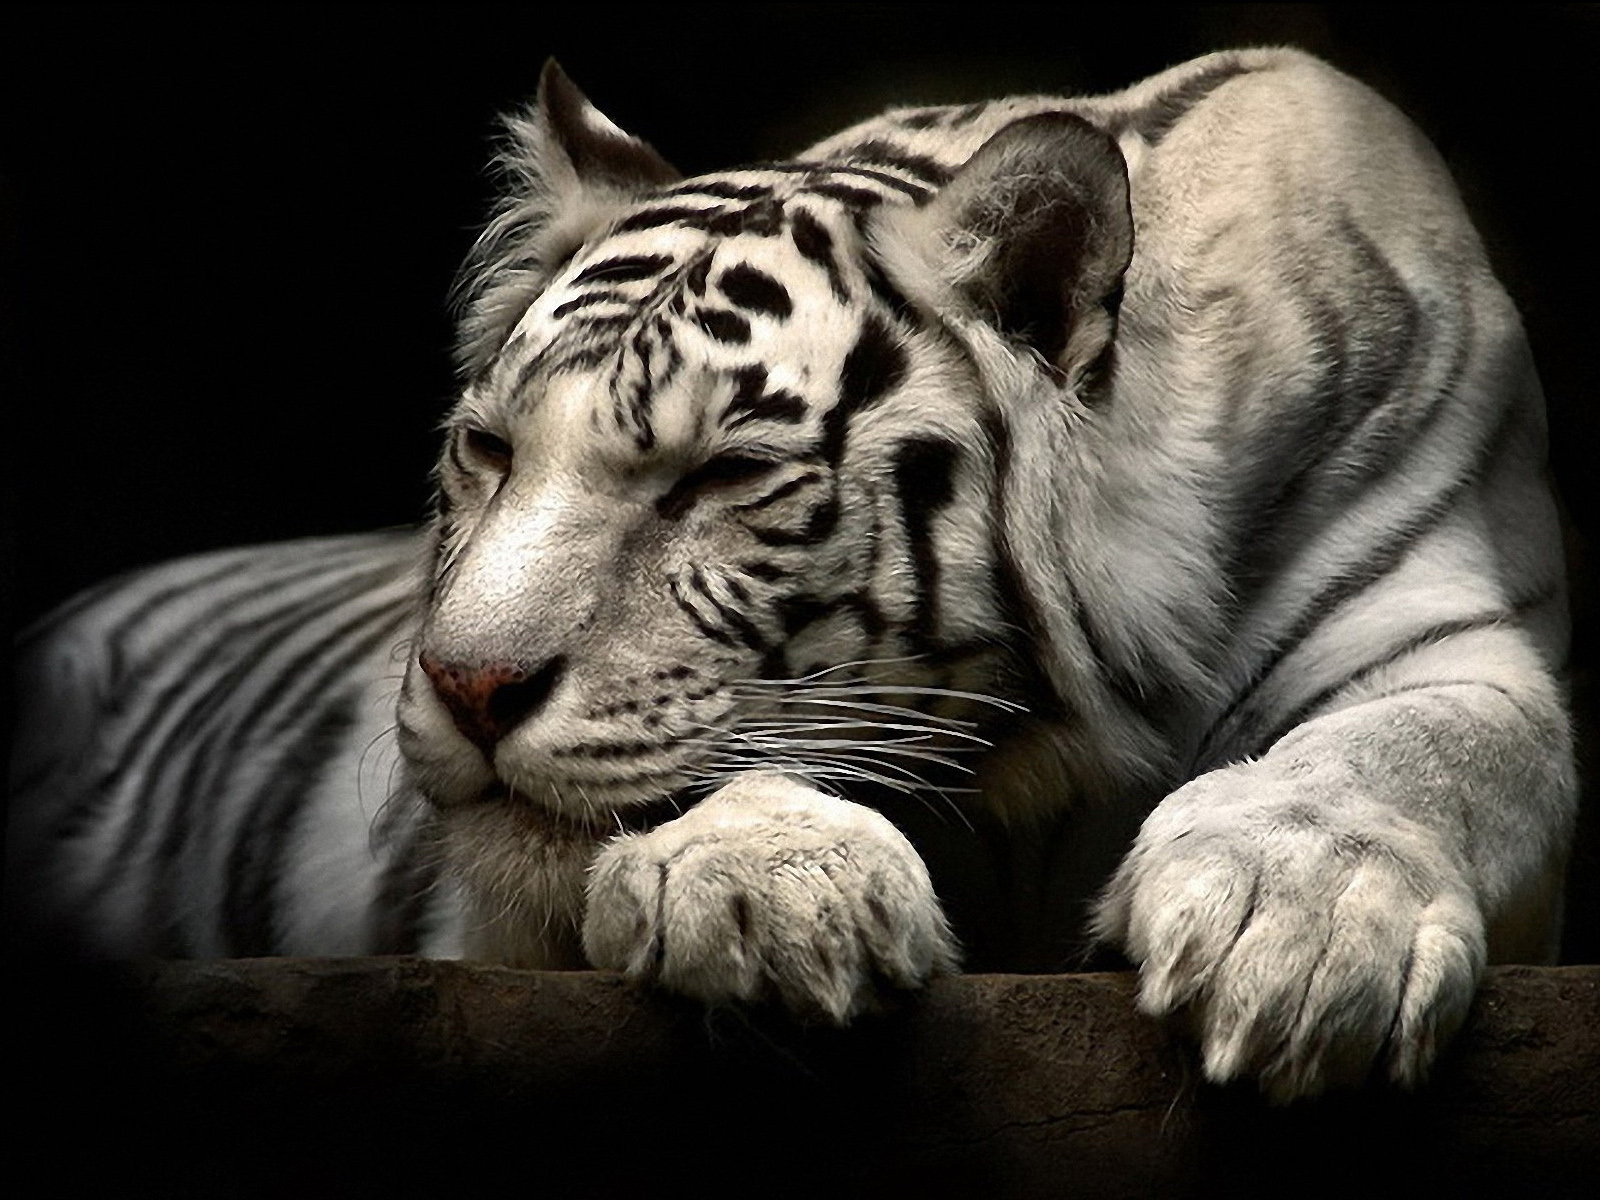 Wallpaper for mobile devices tiger, cats, white tiger